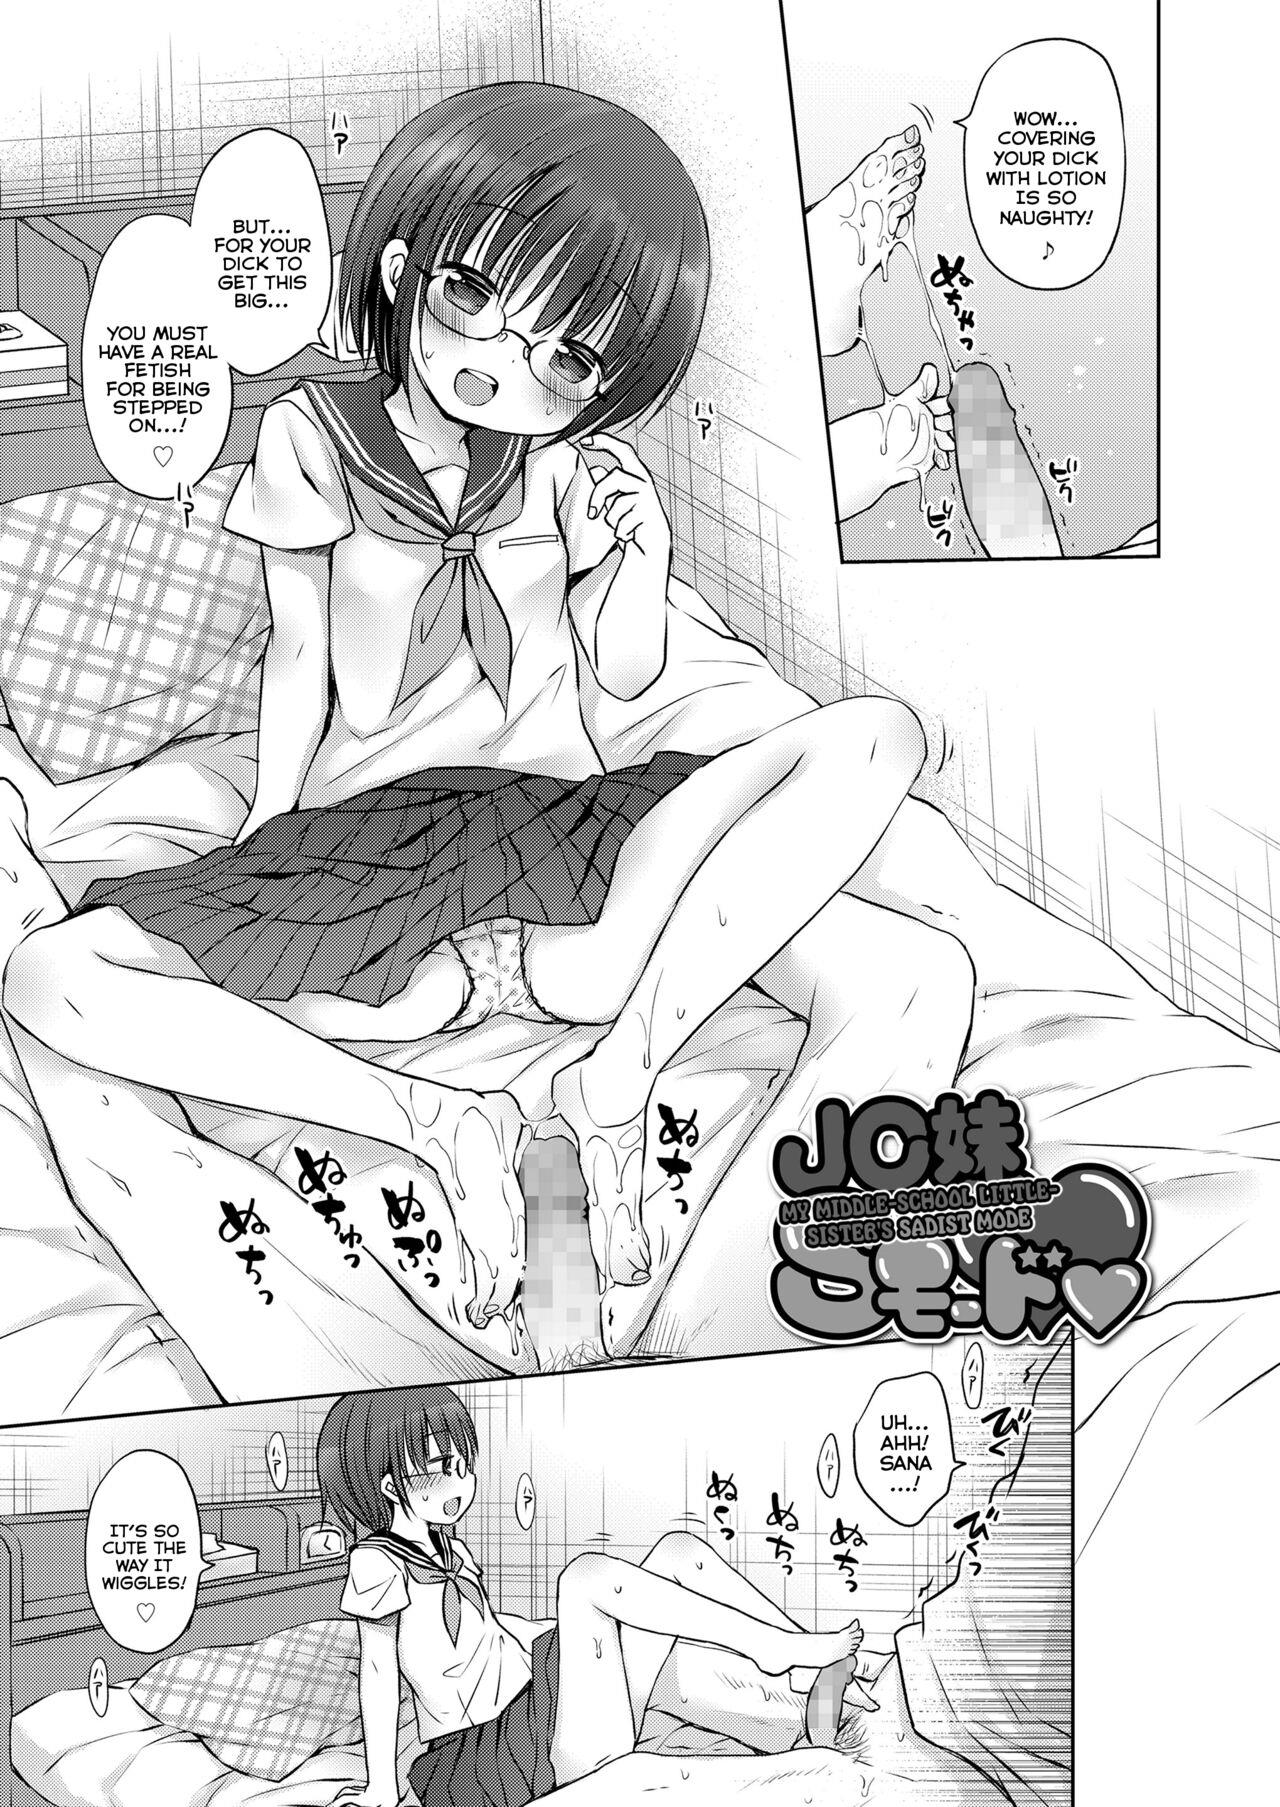 Don't Treat Me As A Child Vol.1 Chapter 4: My Middle-School Little-Sister's Sadist Mode - Picture 1